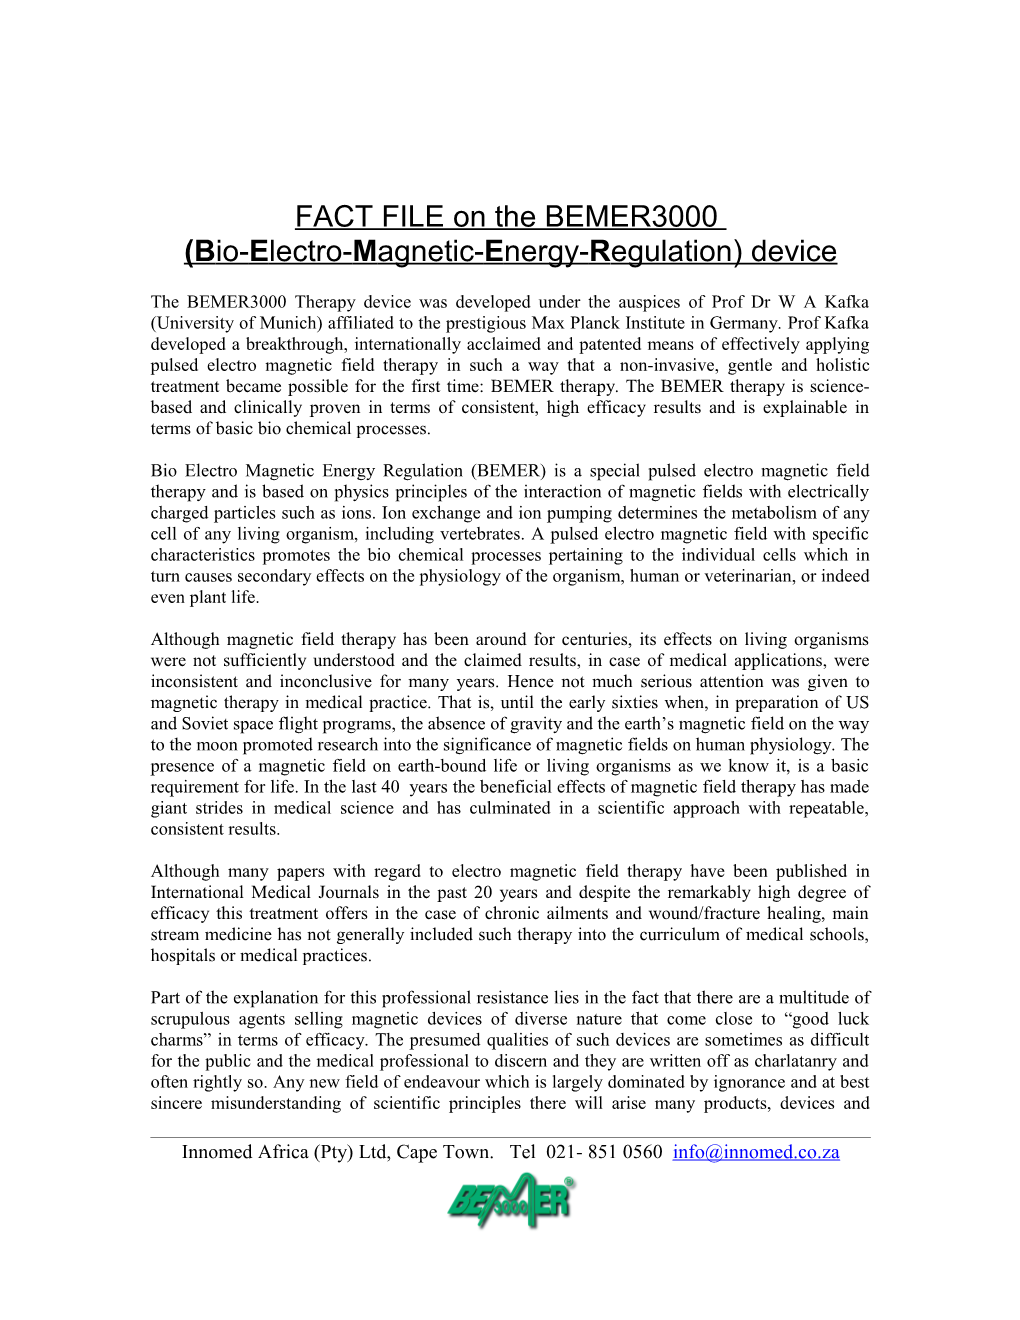 FACT FILE on the BEMER Bio-Electro-Magnetic-Energy-Regulation Device